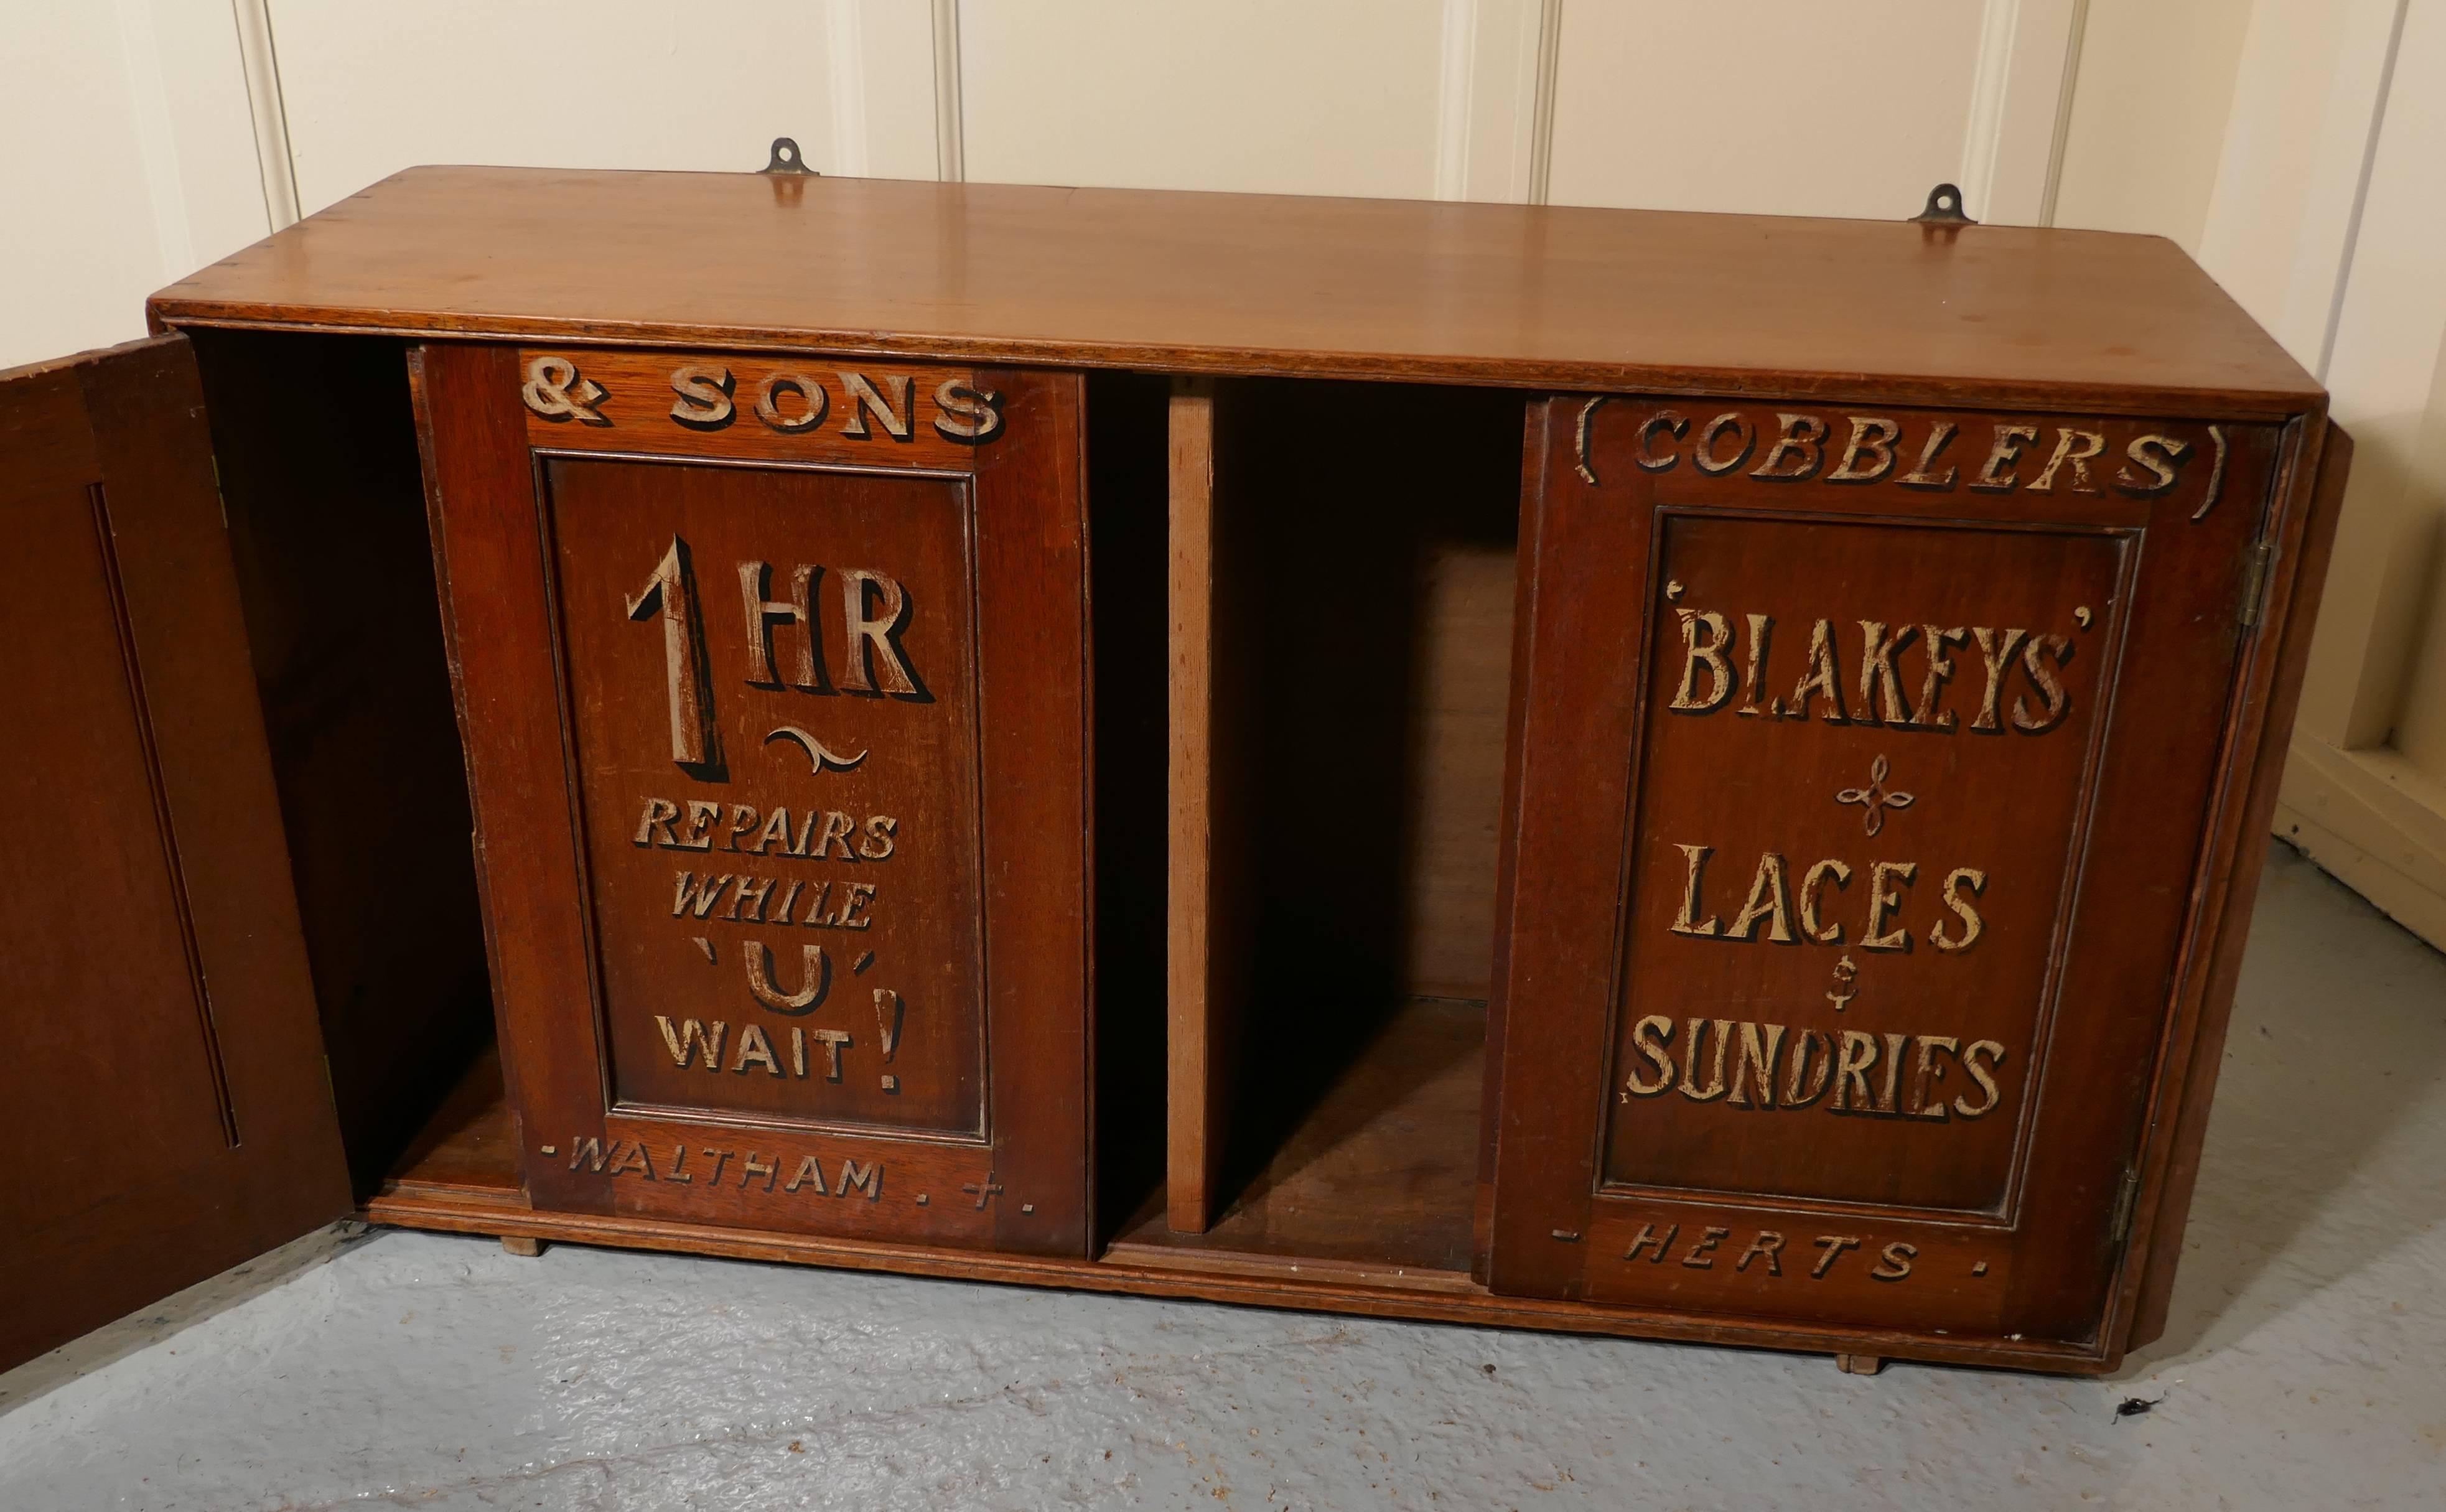 Victorian boot and shoe makers shop cupboard, shop display 

A very attractive piece of shop display furniture, the cupboard is made in mahogany and is very attractive, it has gold writing painted on the doors advertising repairs and sundries